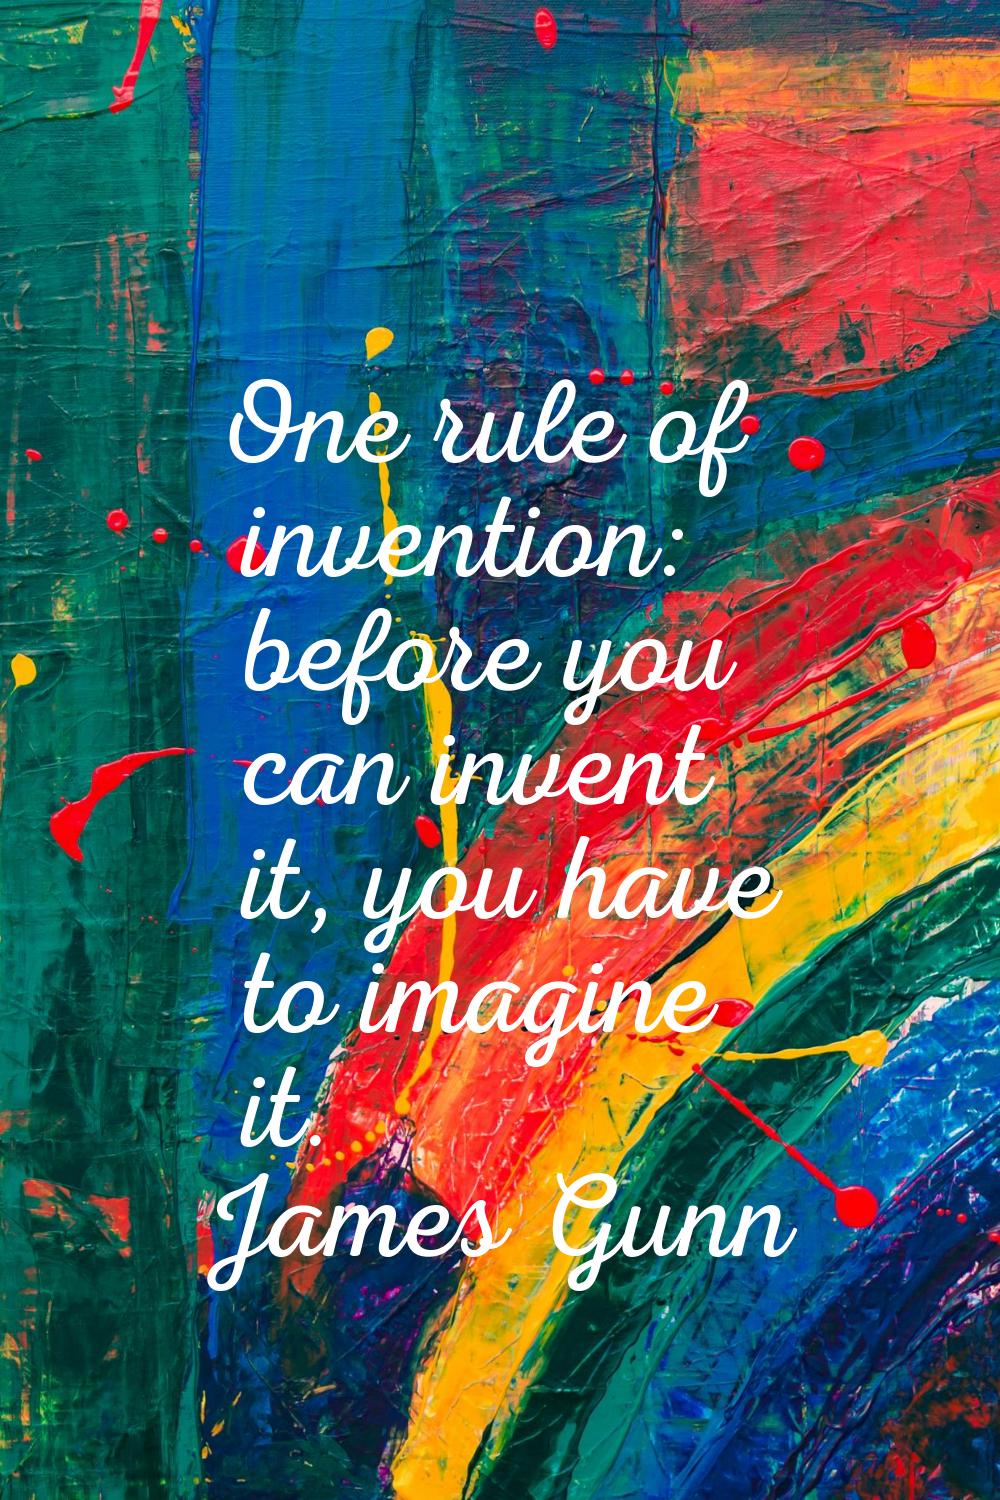 One rule of invention: before you can invent it, you have to imagine it.